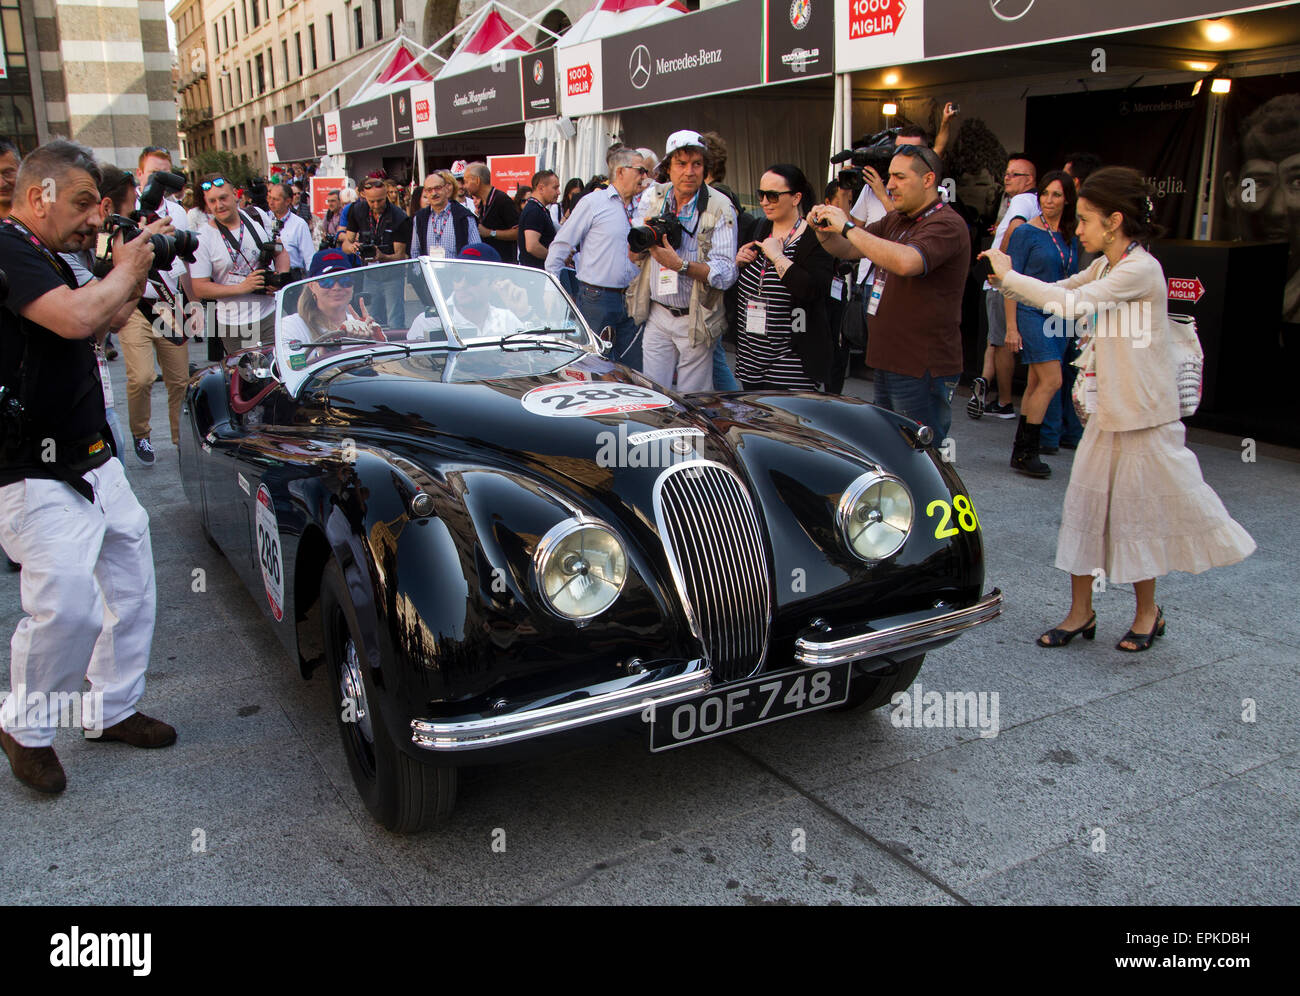 models Jodie Kidd and David gandy in Piazza Vittoria for the start of the classic Italian road race the Mille Miglia from Brescia to Rome and back again covering 1000 miles. 14.05.2015 Stock Photo